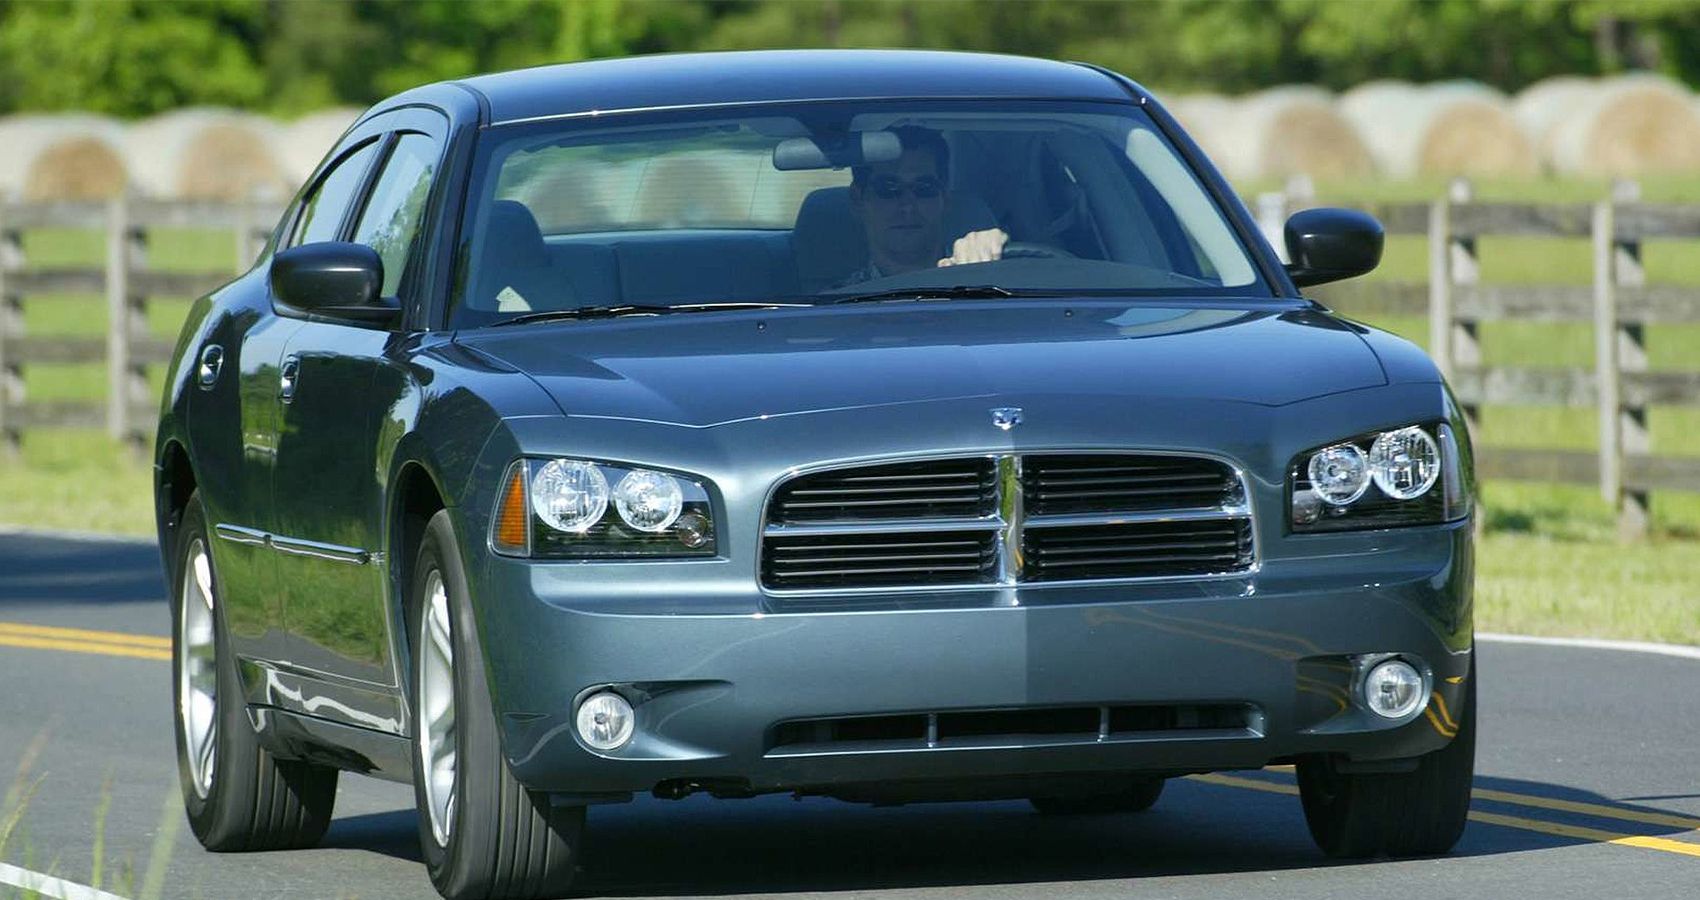 2006 Dodge Charger Front View